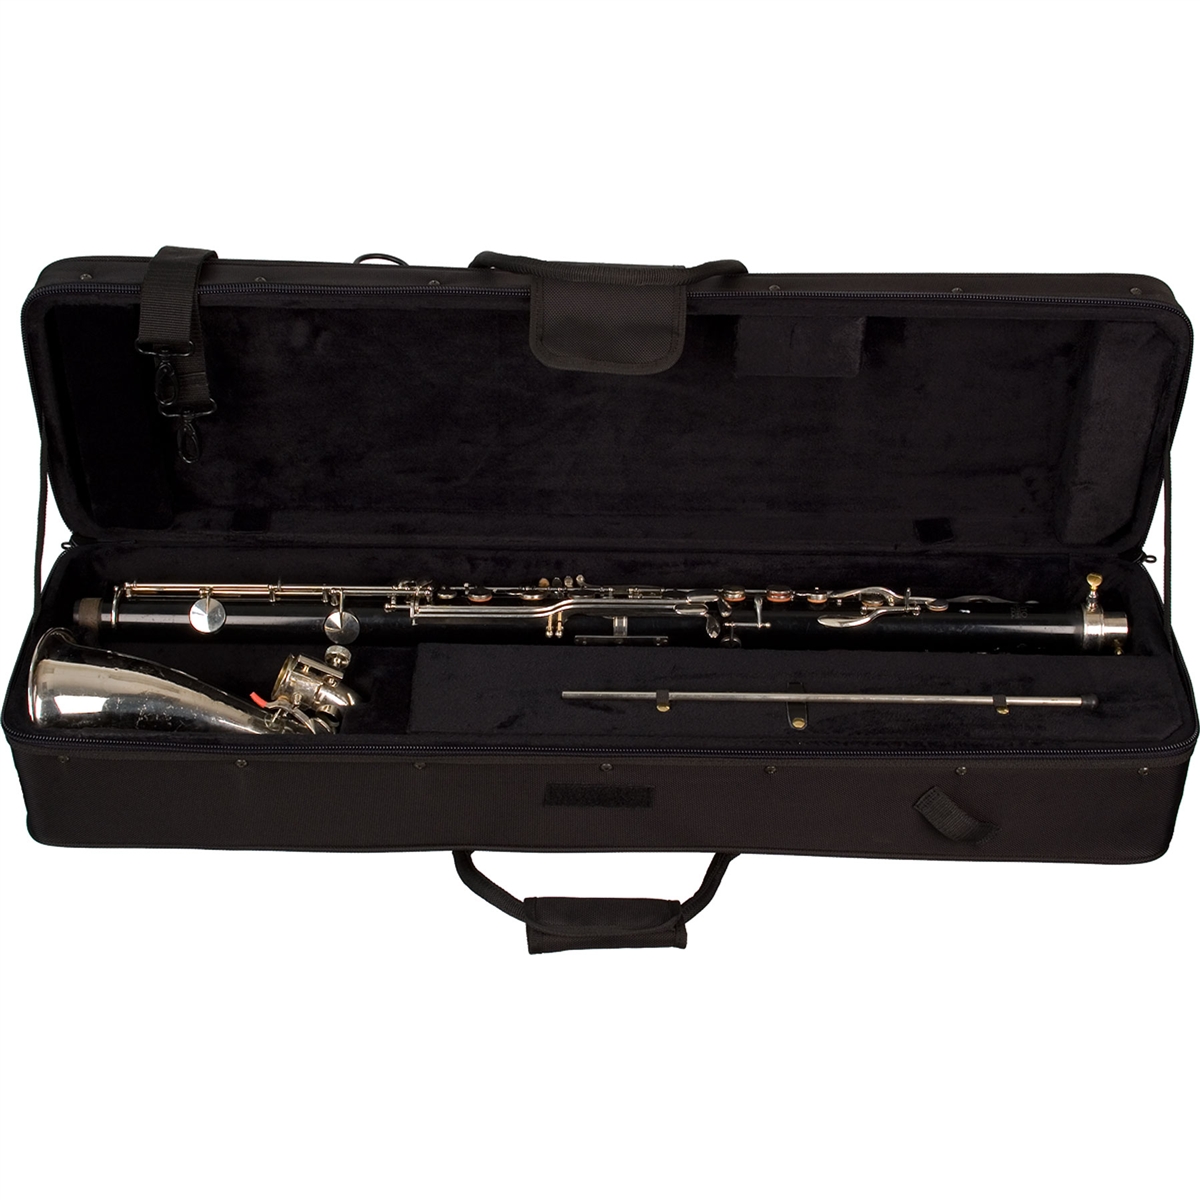 Protec PB319 Case for Bass Clarinet